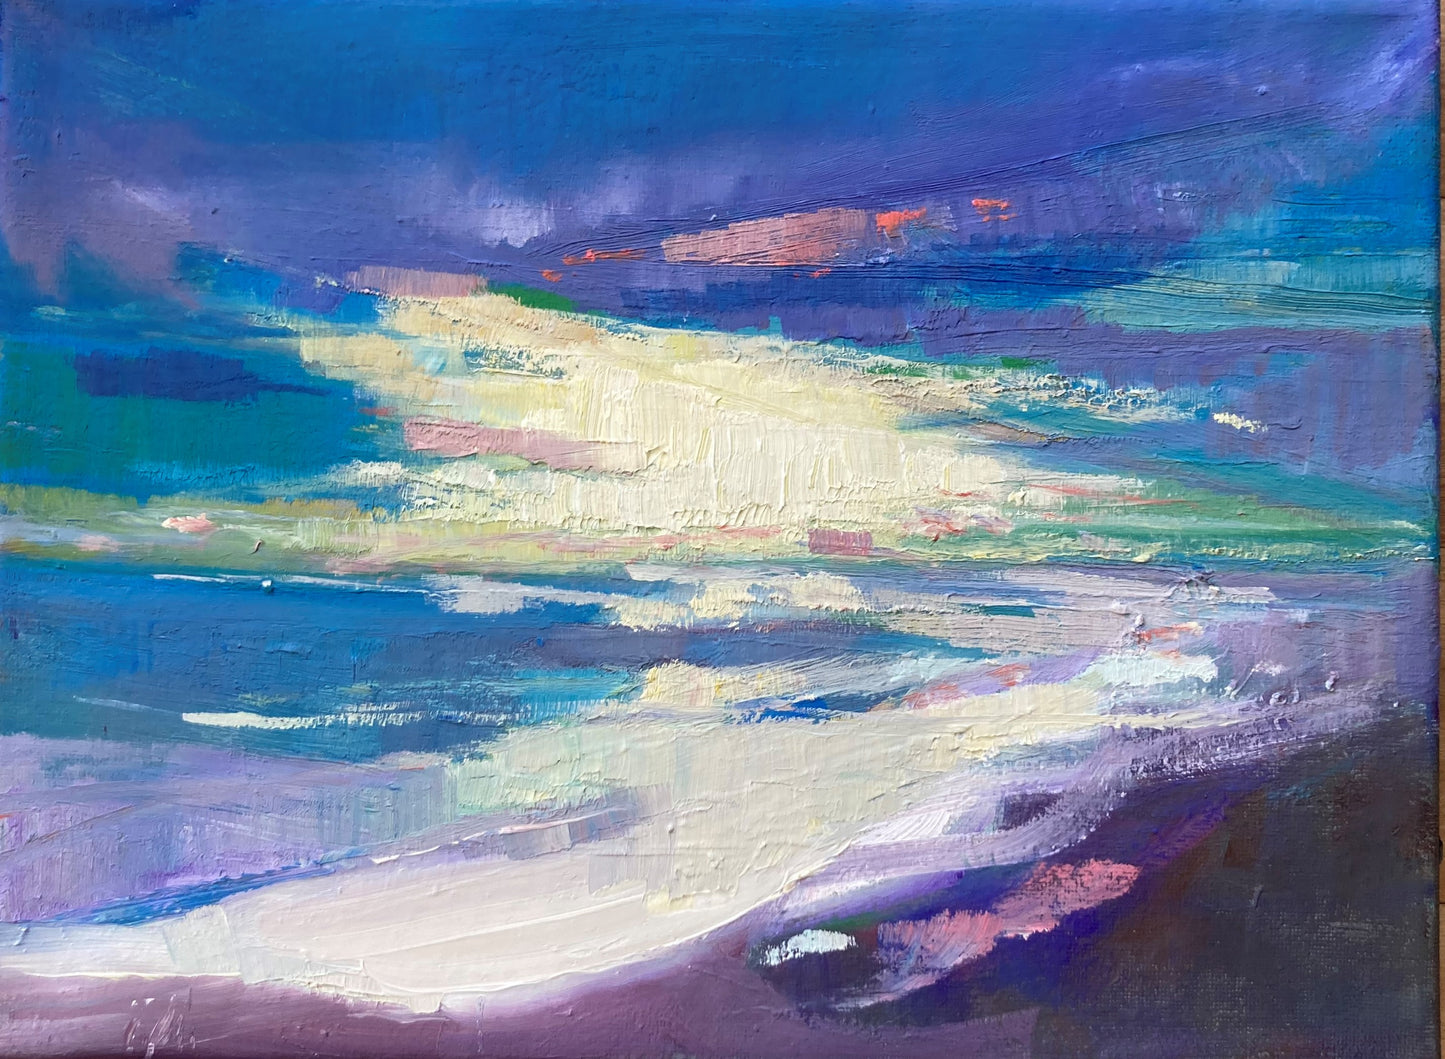 Winter Light - Original Oil Painting by Peg Connery-Boyd